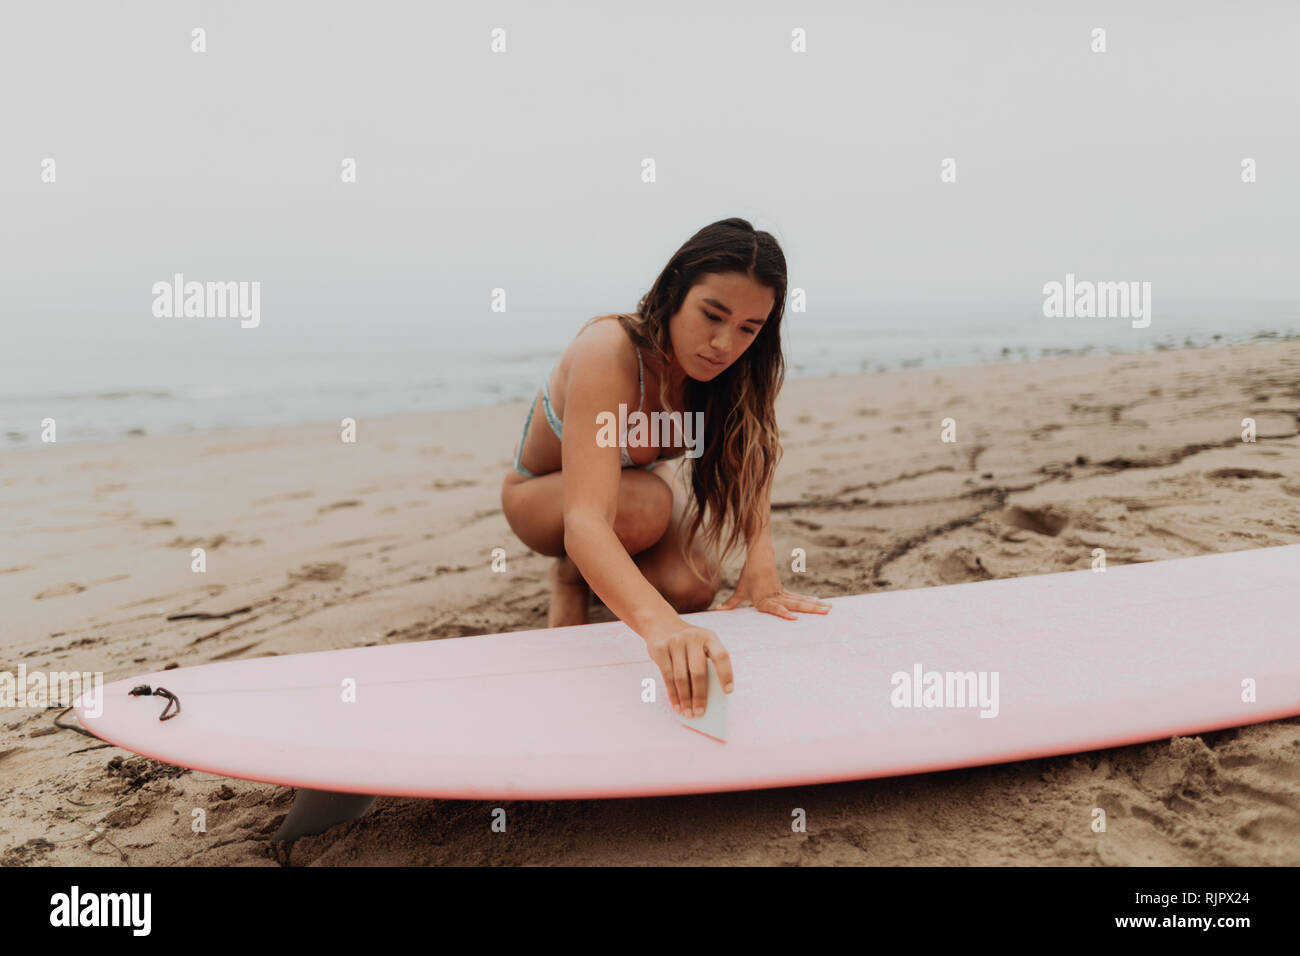 Jeune femme surfer waxing with surfboard on beach, Ventura, Californie, USA Banque D'Images